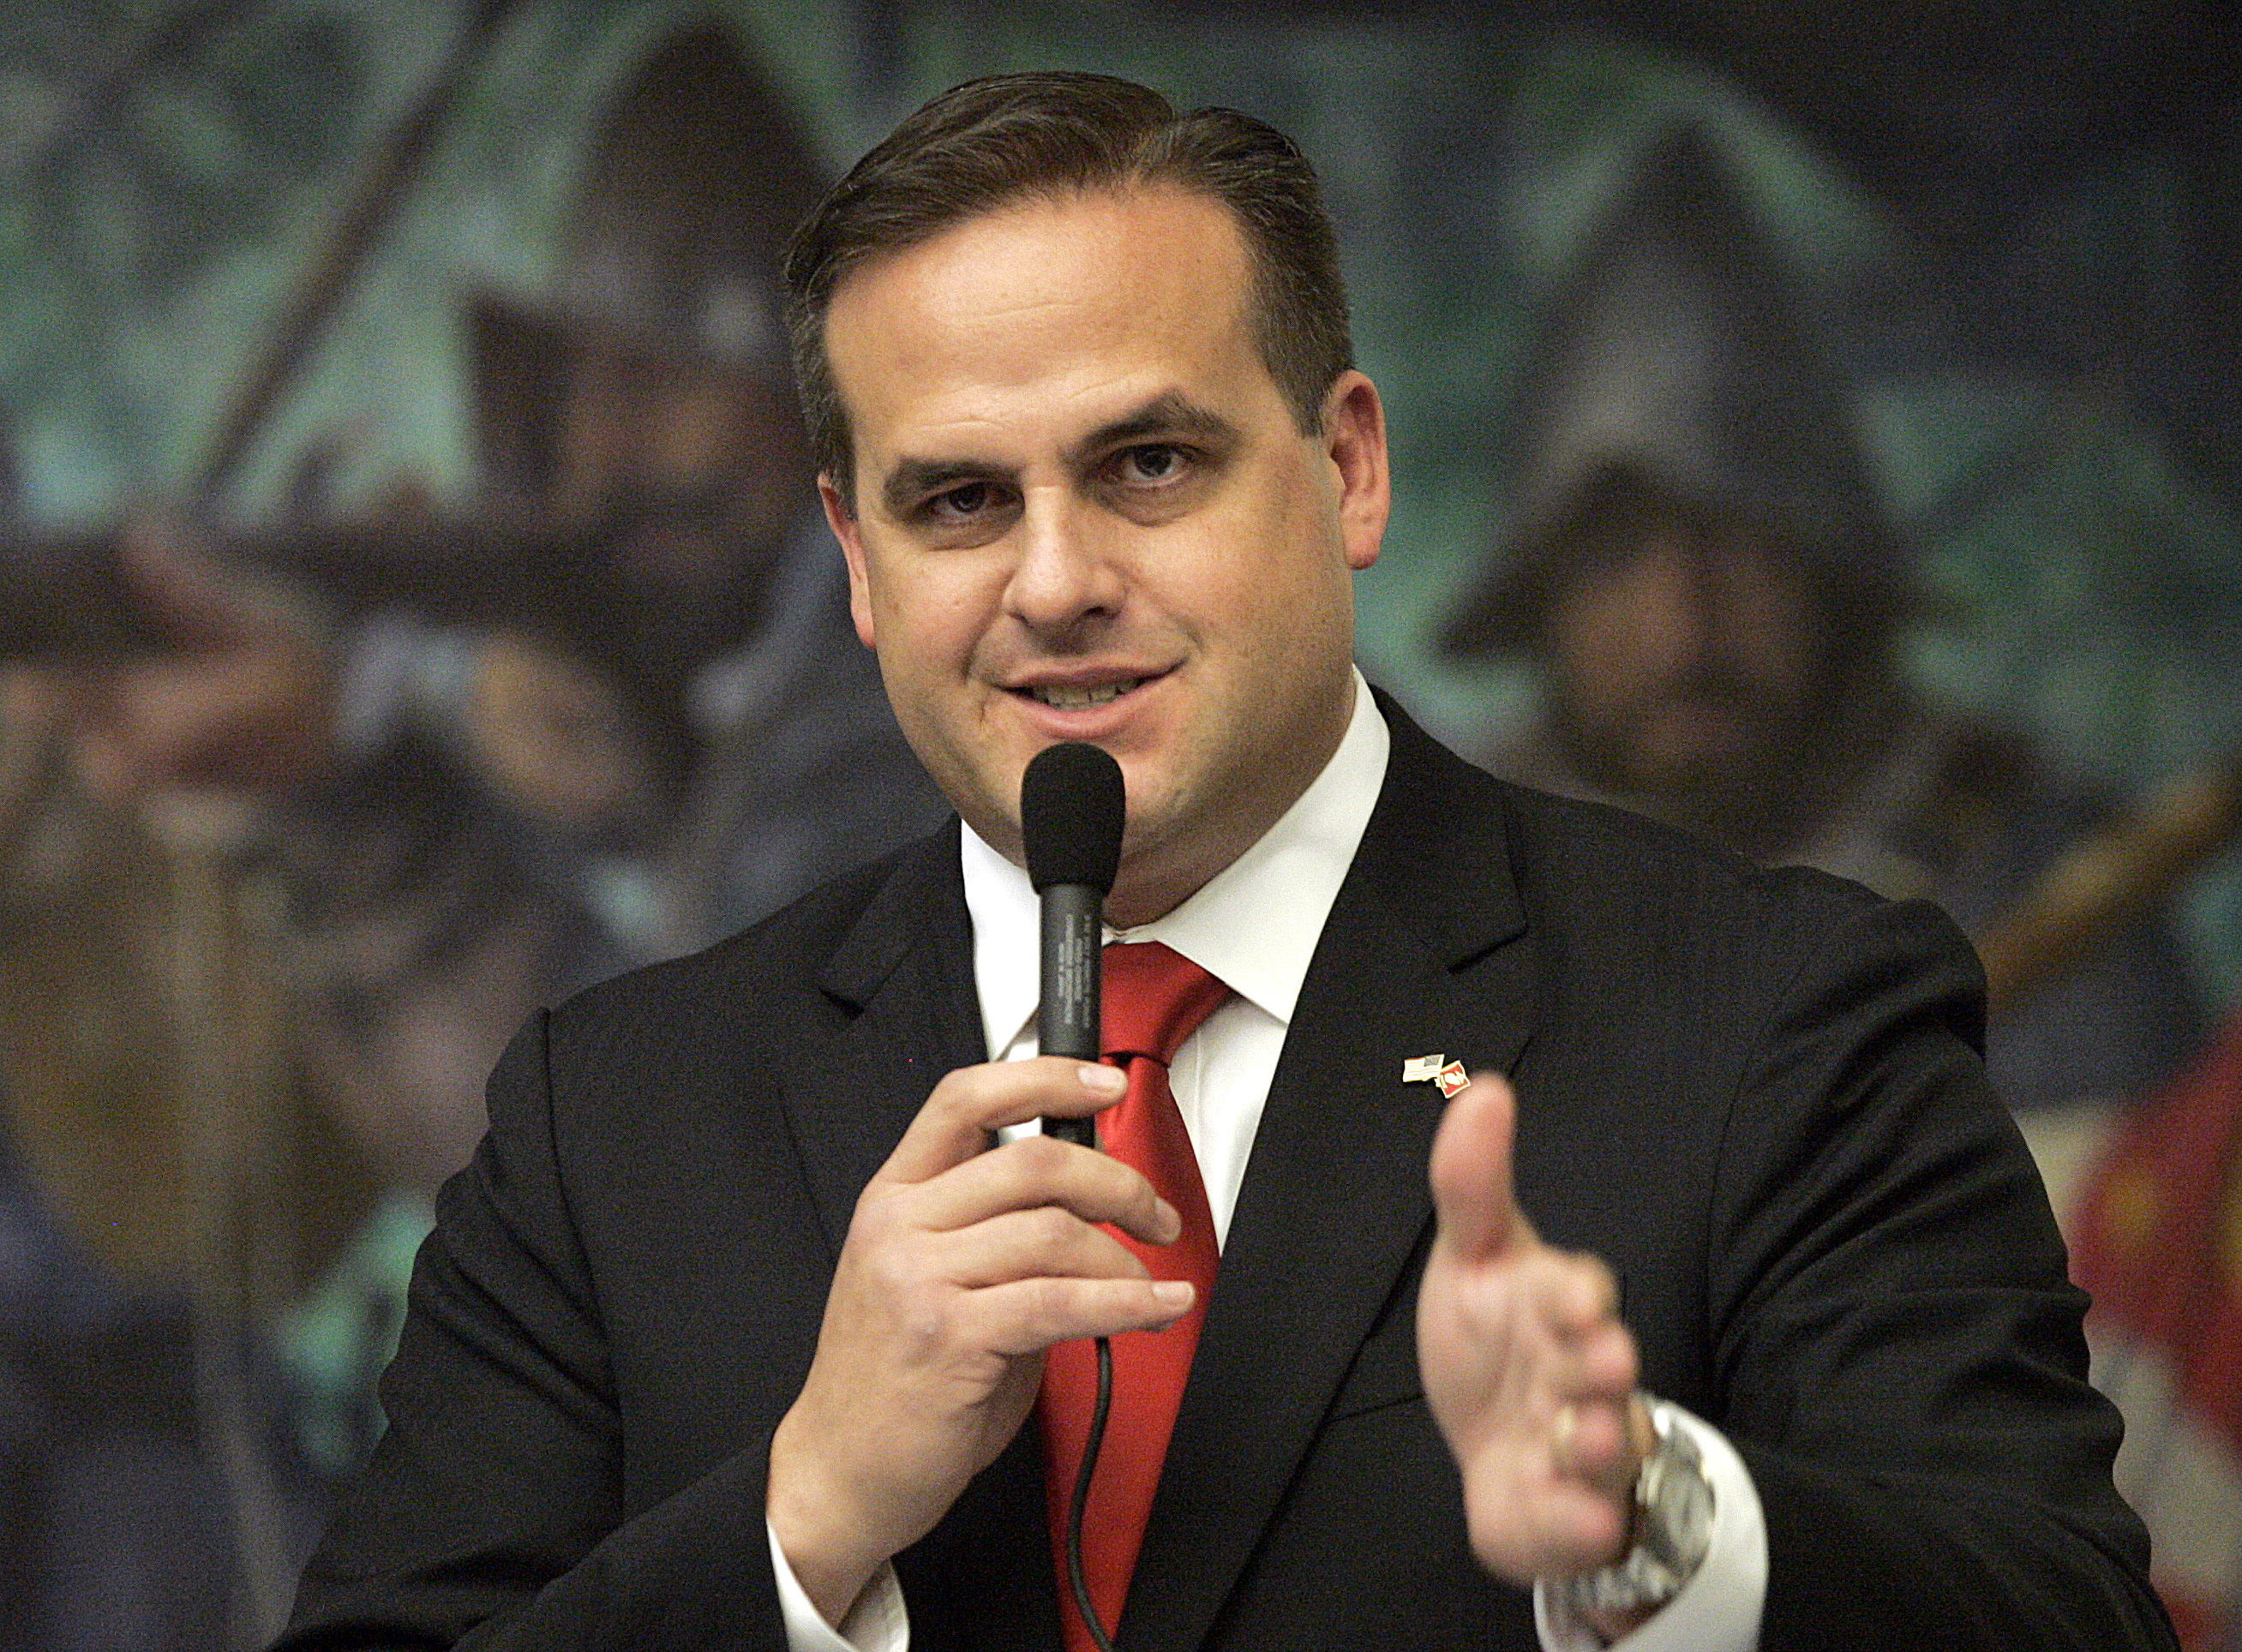 Republican state senator Frank Artiles in Tallahassee, Fla. on March 9, 2012. (Steve Cannon—AP)